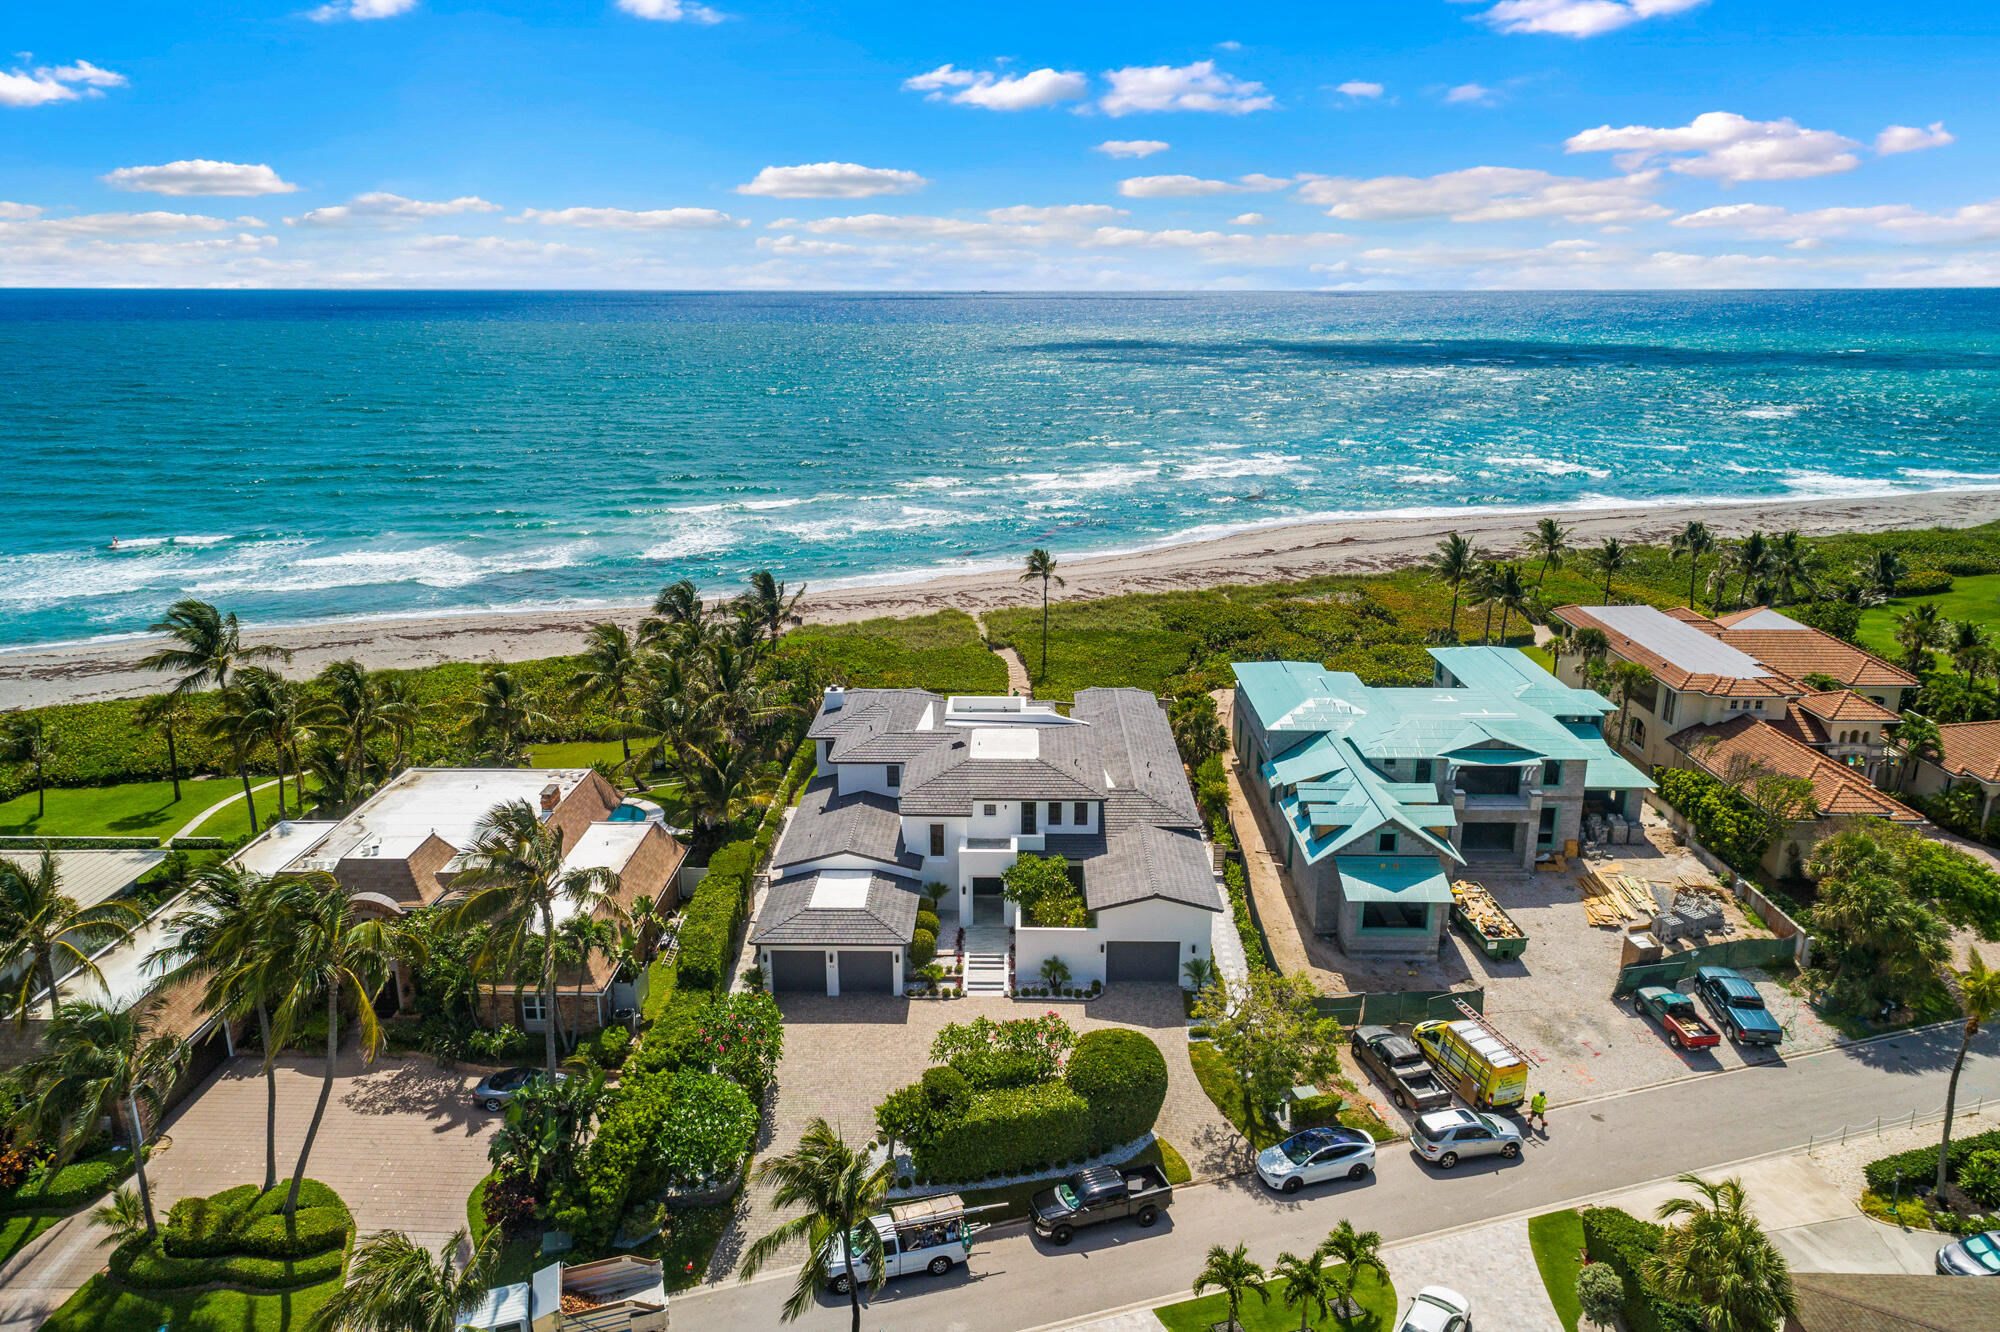 Unobstructed panoramic views of the turquoise Atlantic Ocean from this 8,600 total sf home with 5 bedrooms and 5.5 bathrooms. Constructed in 2011 and recently updated, the home is situated on one of the highest elevated lots on the ocean in south Florida! Panoramic ocean views and great views of the Jupiter Inlet everywhere from the expansive downstairs master suite, oversized kitchen, all living areas and guest bedrooms. The recently updated kitchen opens to the living area spacious covered patio. All new beautiful outdoor stone pavers and renovated pool area that overlooks the turquoise blue waters of the Atlantic! Other features include newly updated landscaping, impact windows and doors, elevator, large balcony overlooking the ocean, rooftop terrace looking down on the ocean and back concrete block and poured concrete and steel construction, and a very attractive home inside and out! Located in Jupiter Inlet Colony on the southern tip of Jupiter Island, this premier oceanfront location is close to everything, but secure in one of the safest towns in America. The community has a marina and yacht club available as well.